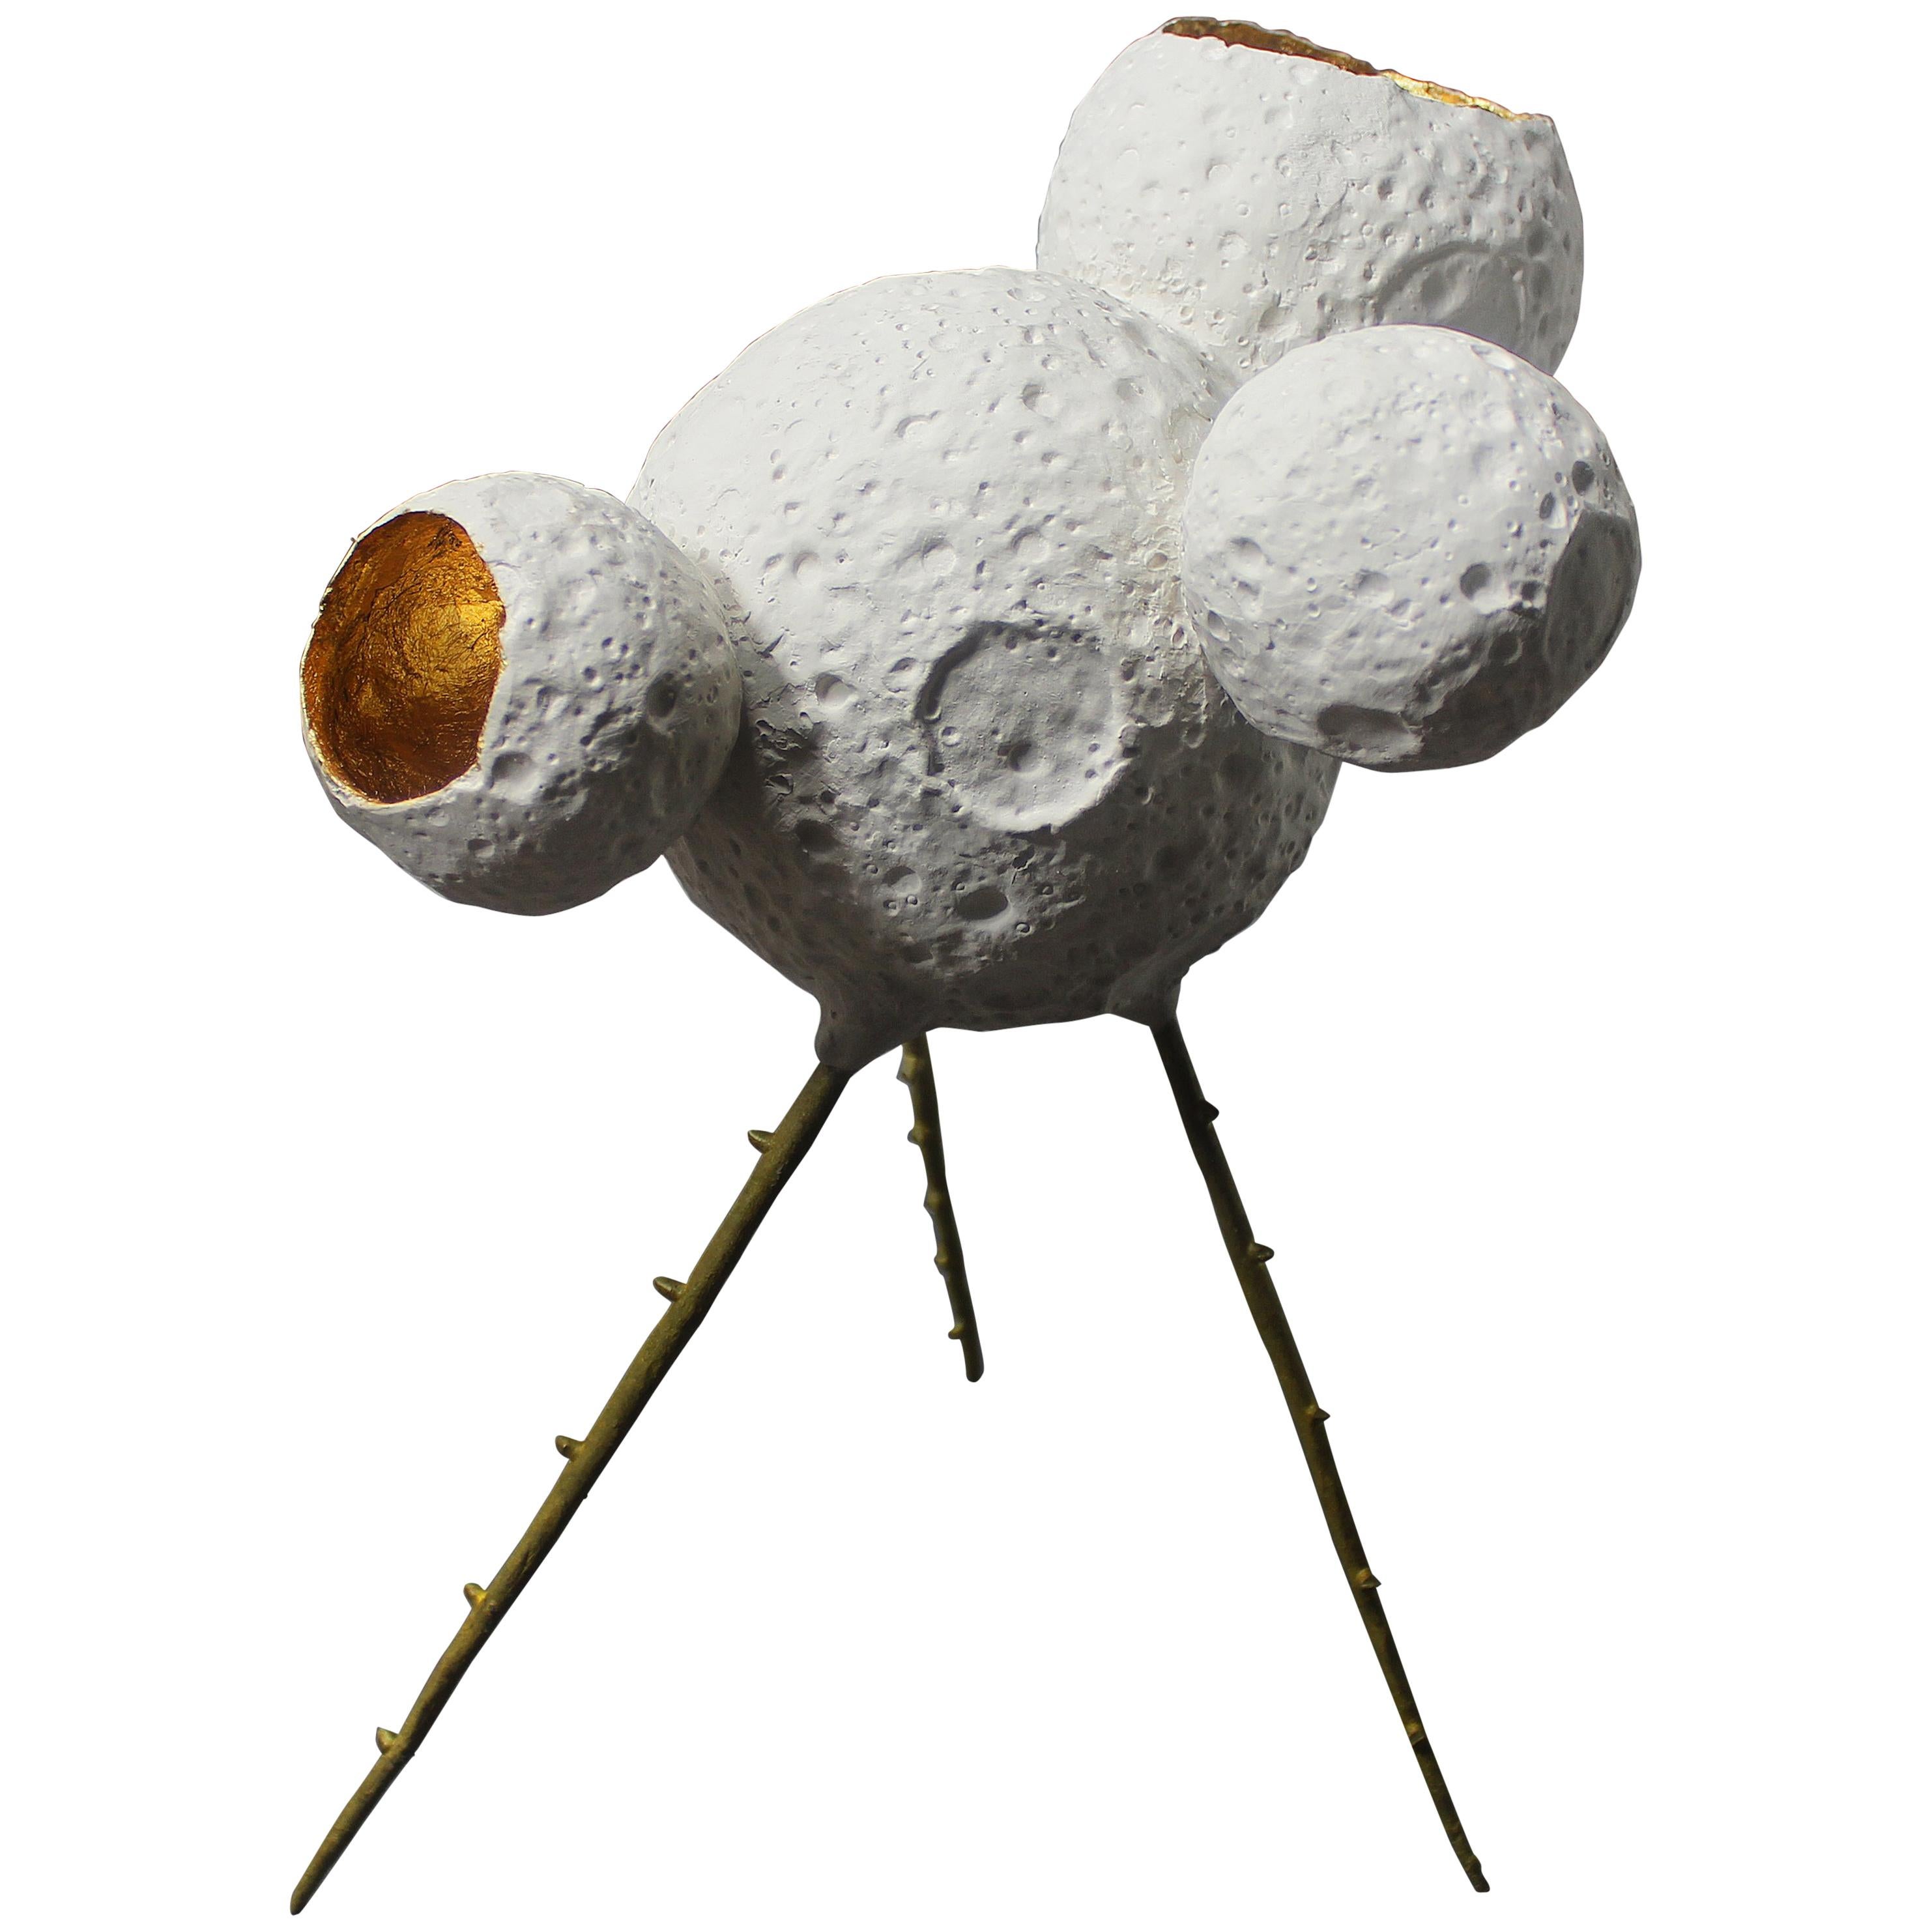 MM0005 Sculpture by Mikel Durlam and Monty J, Ceramic, Gold Leaf and Brass im Angebot